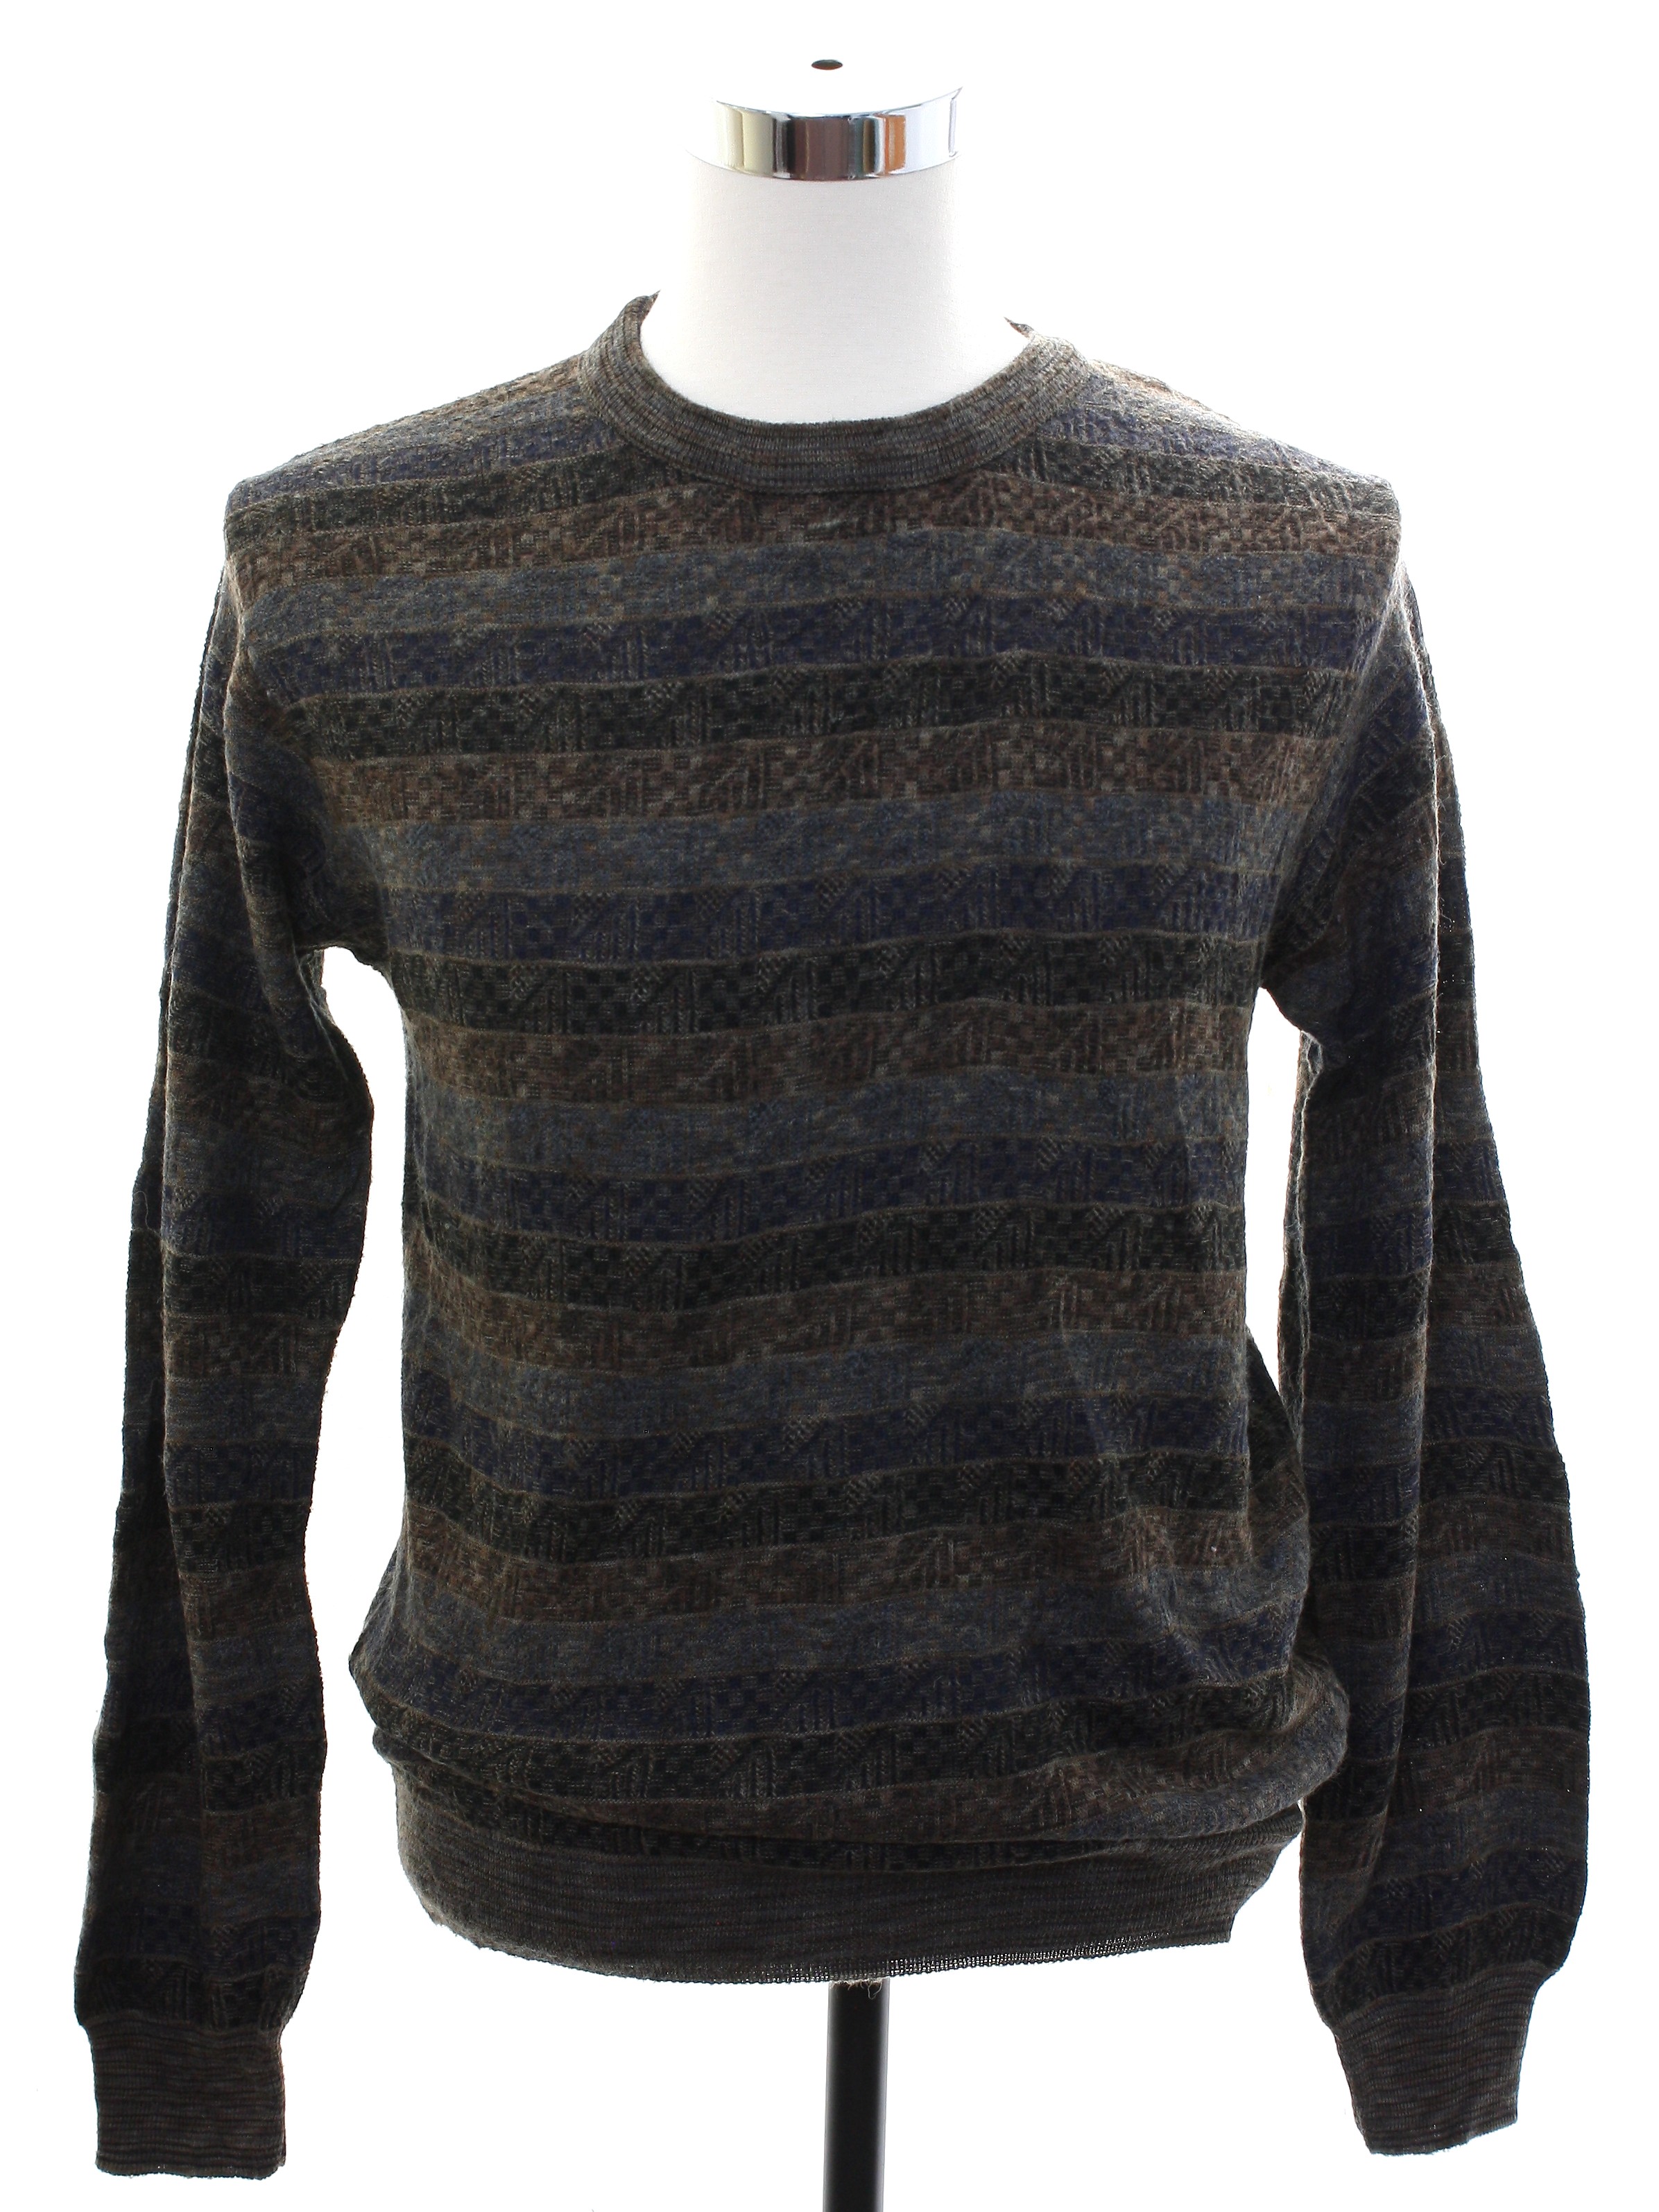 Eighties Vintage Sweater: Late 80s or Early 90s -Pronto-Uomo- Mens ...